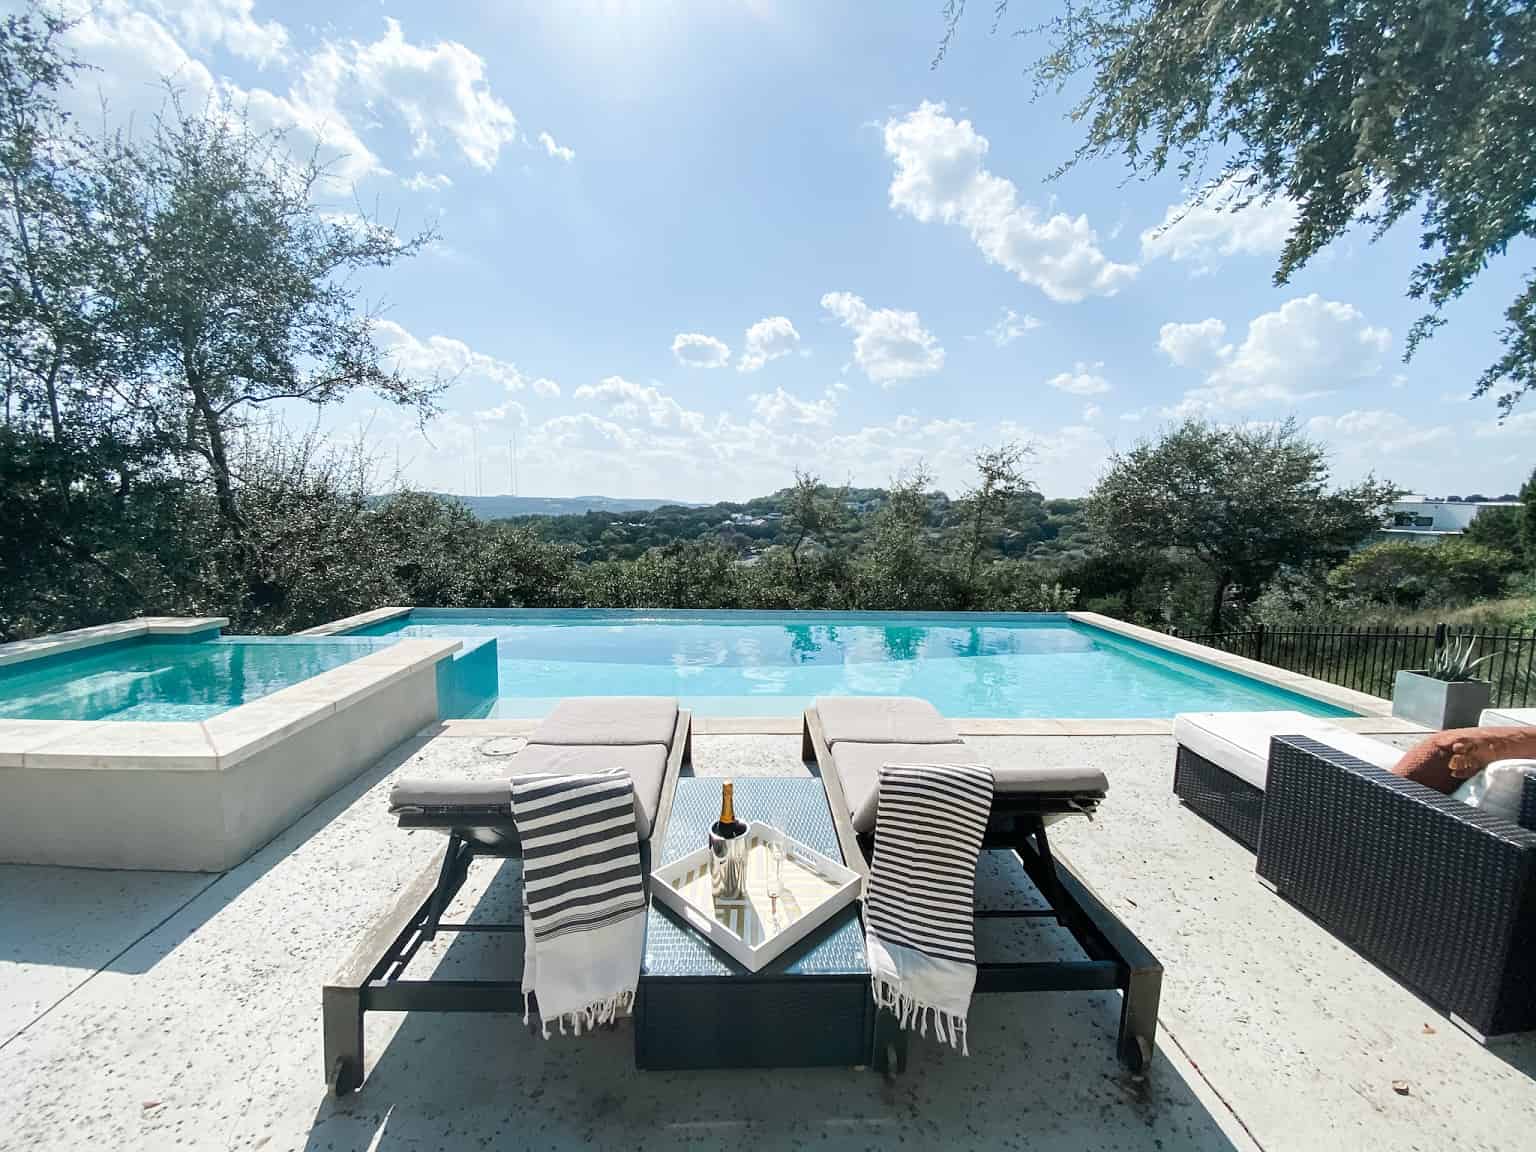 Pool with a View! Modern light-filled home with 2 decks austin rental